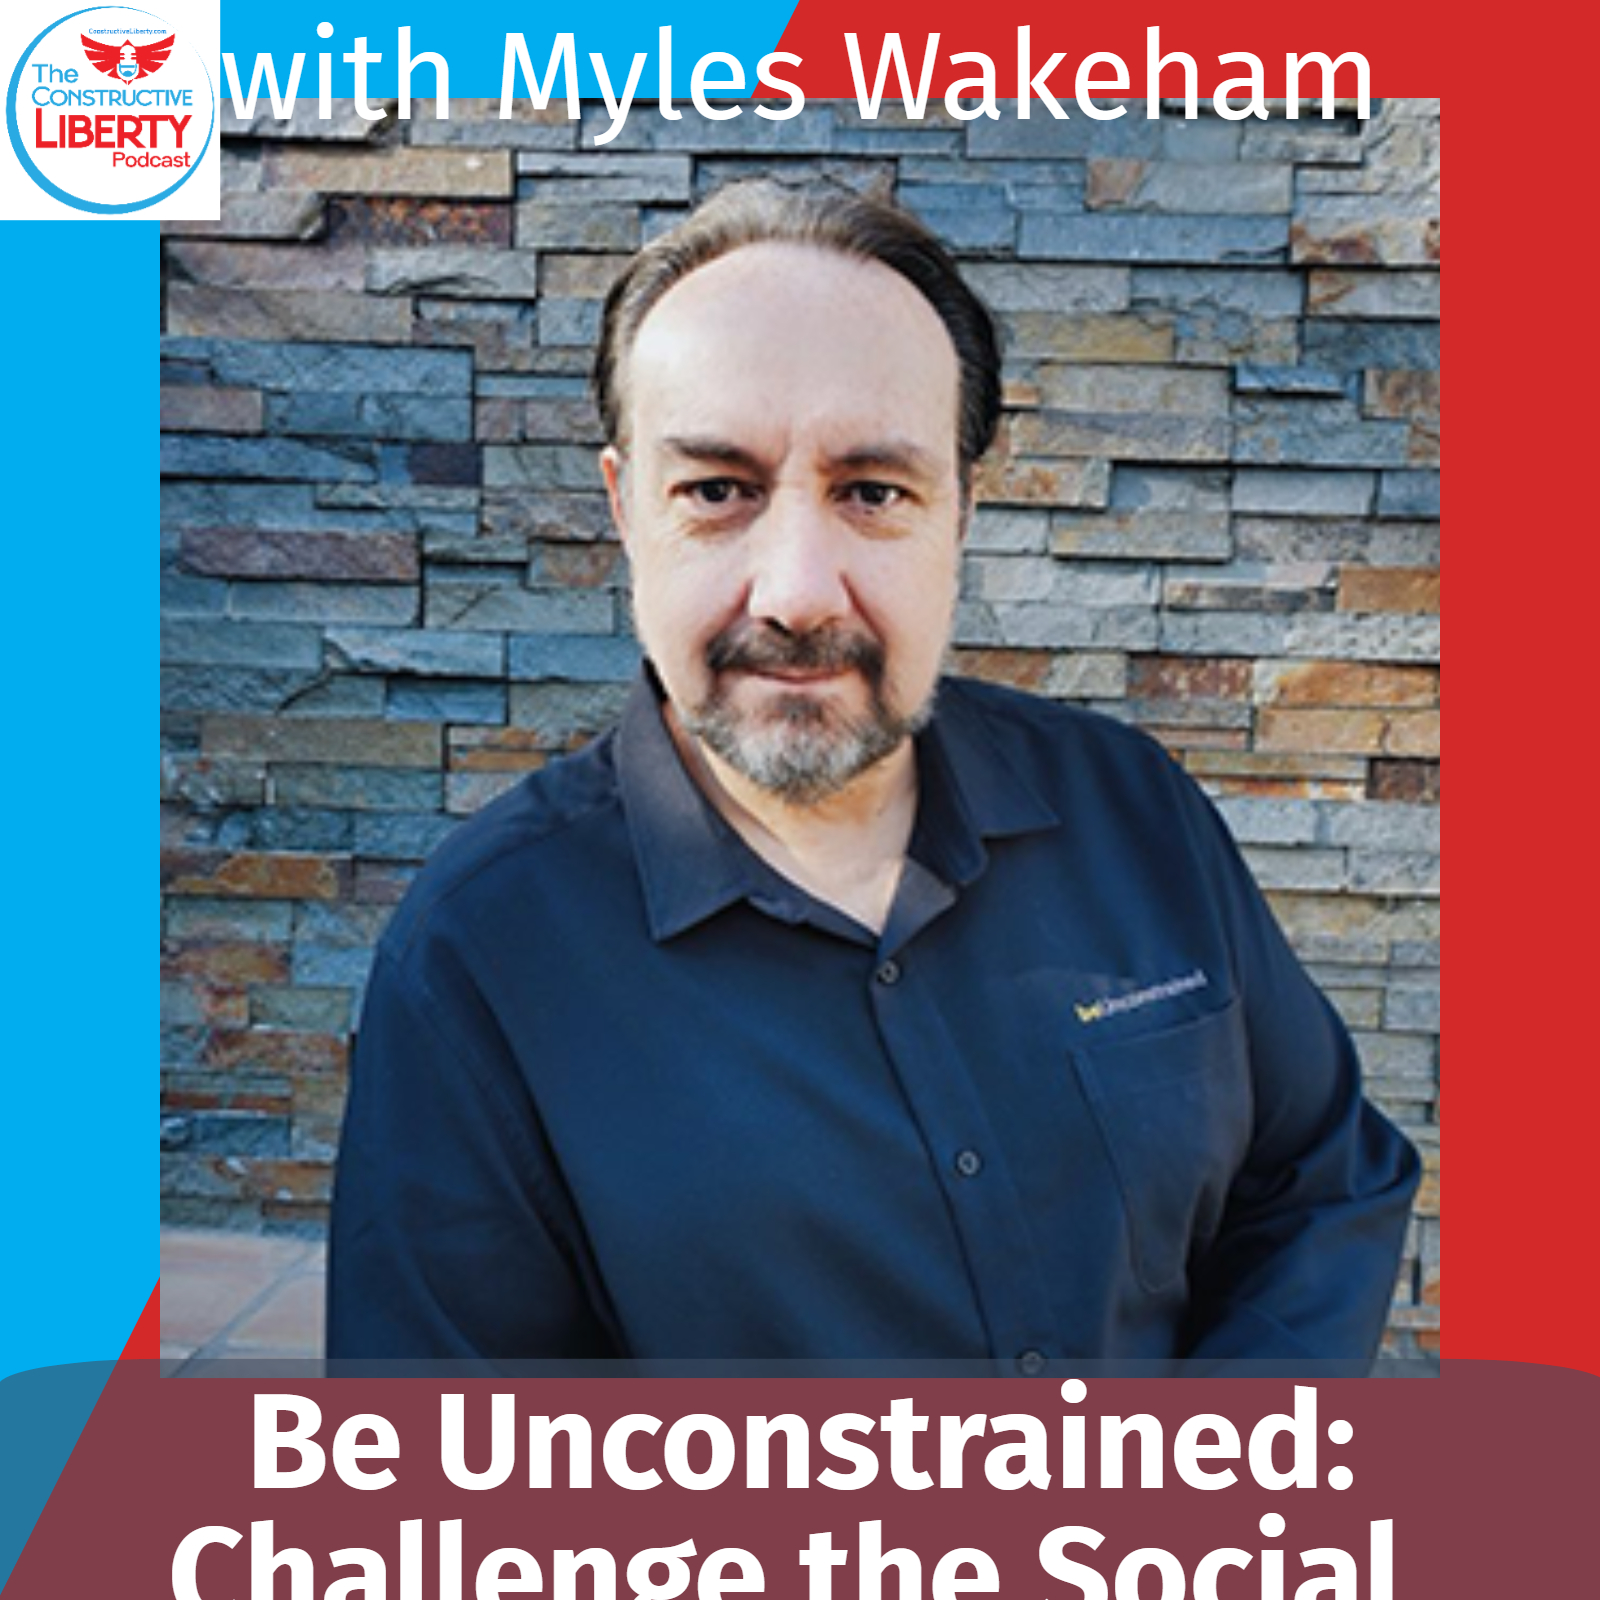 Be Unconstrained: Challenge Social Mantras - with Myles Wakeham